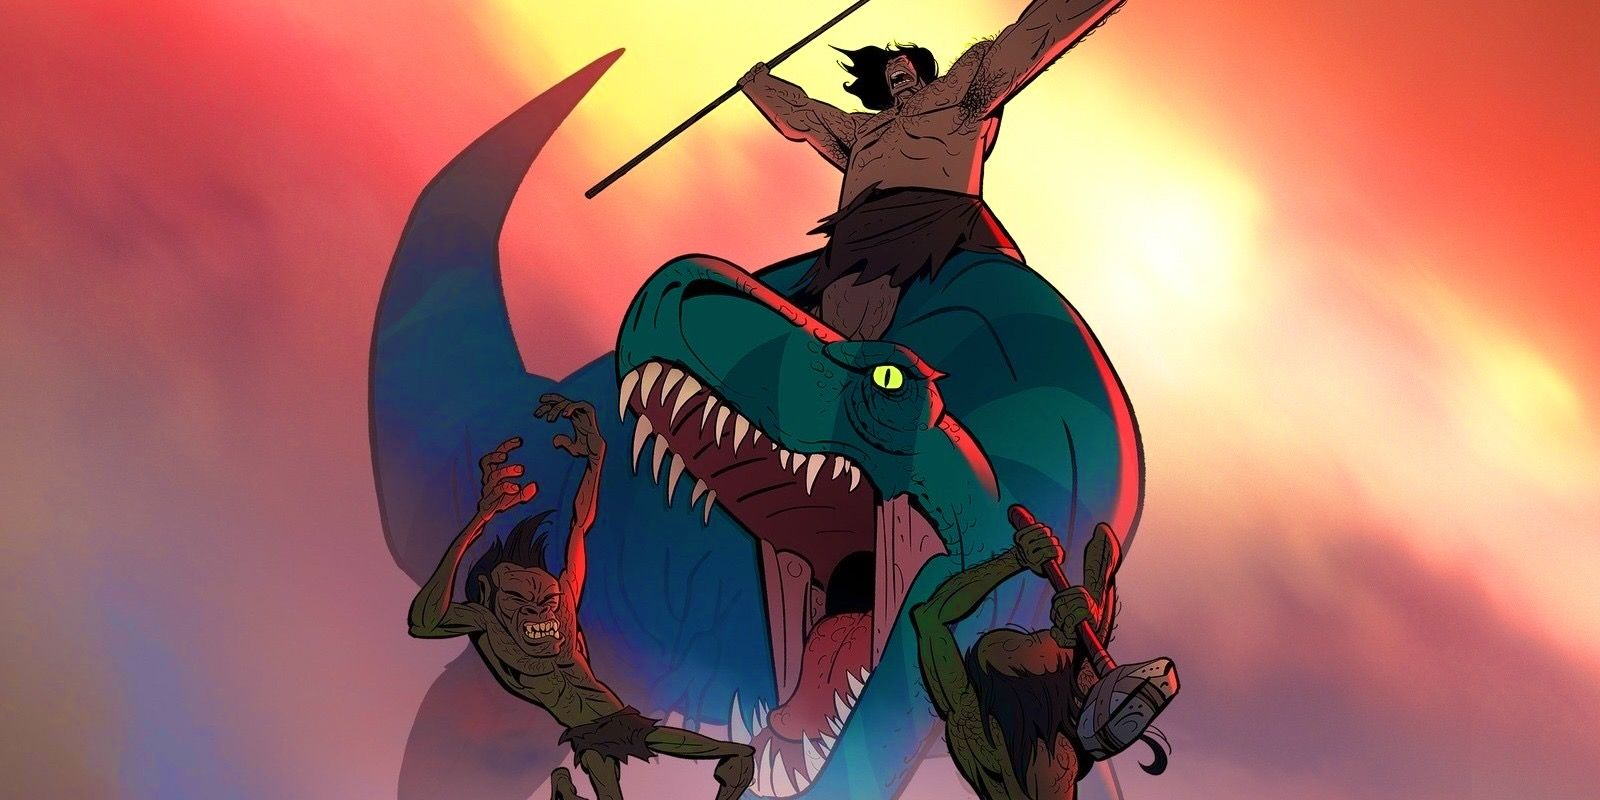 Spear riding atop his T. Rex named Fang as they fight a pair of hominids.